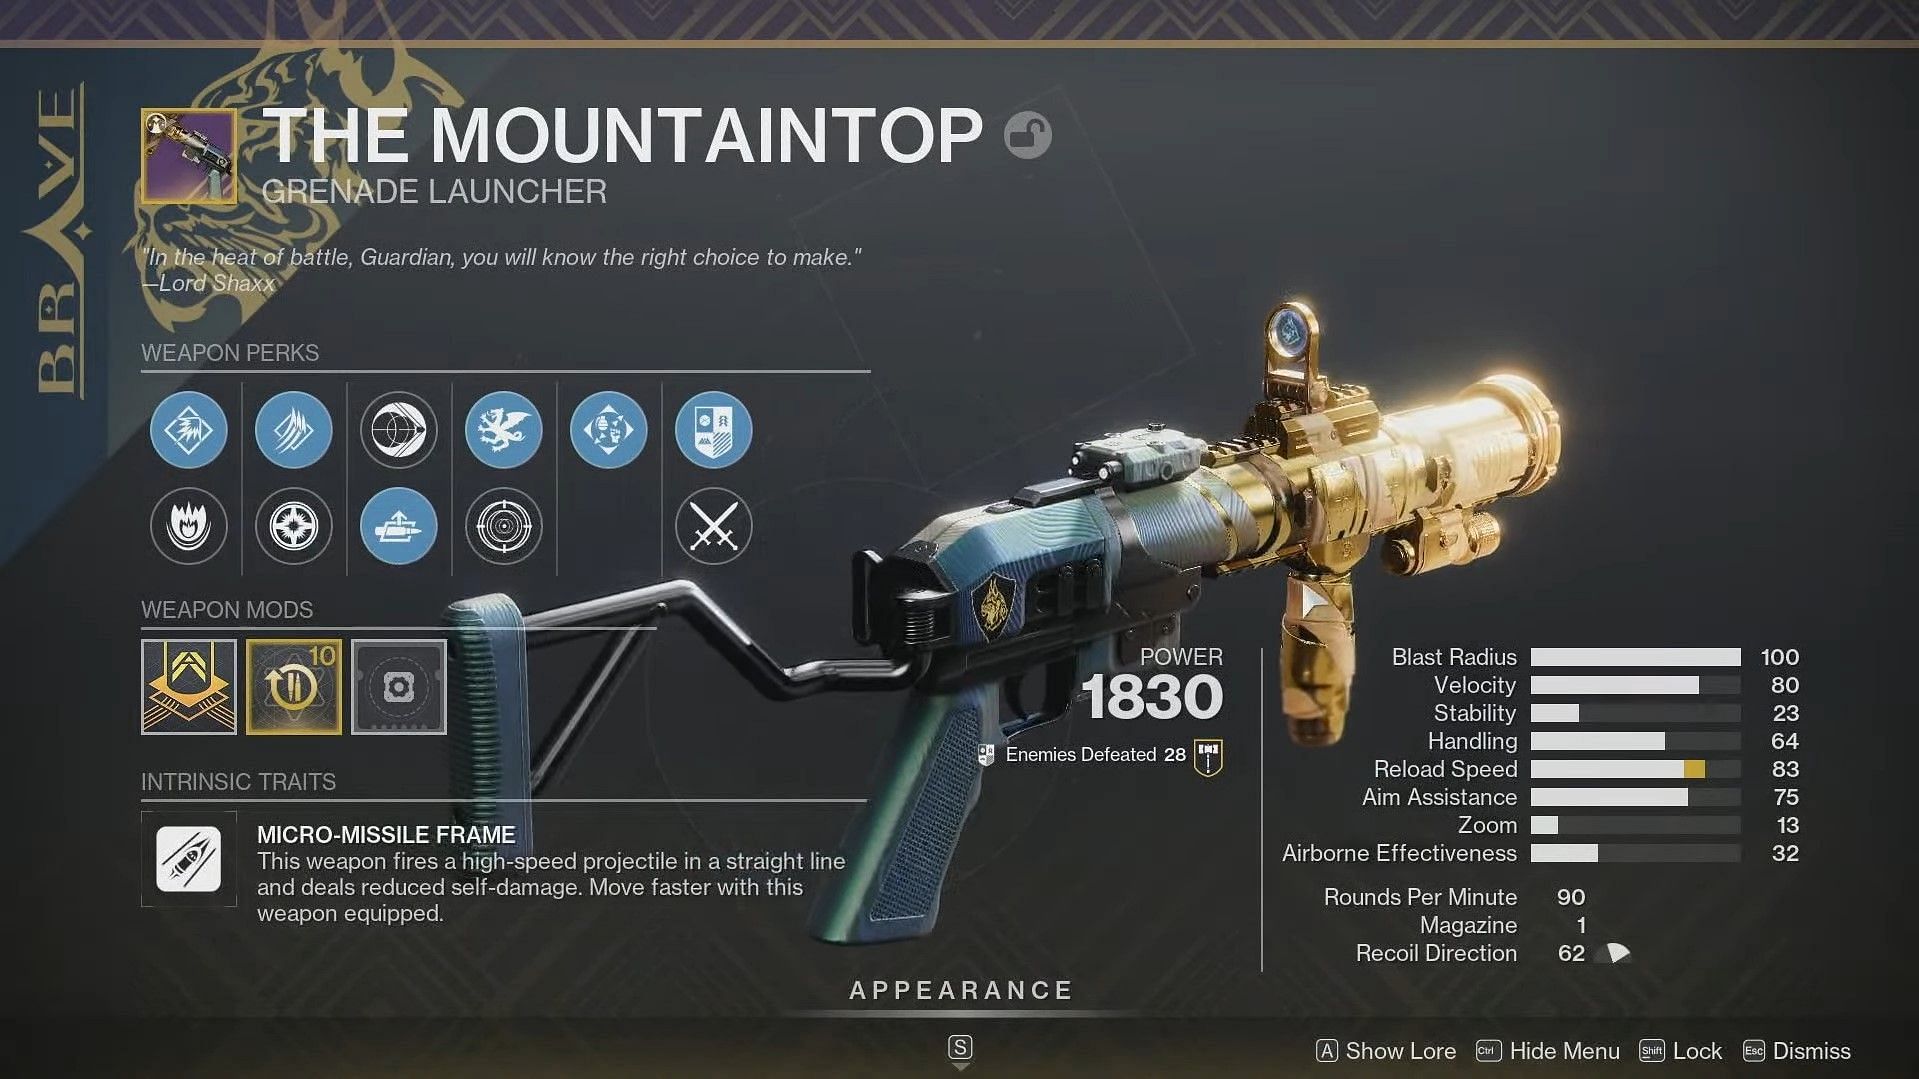 The re-issued Mountaintop (Image via Bungie)